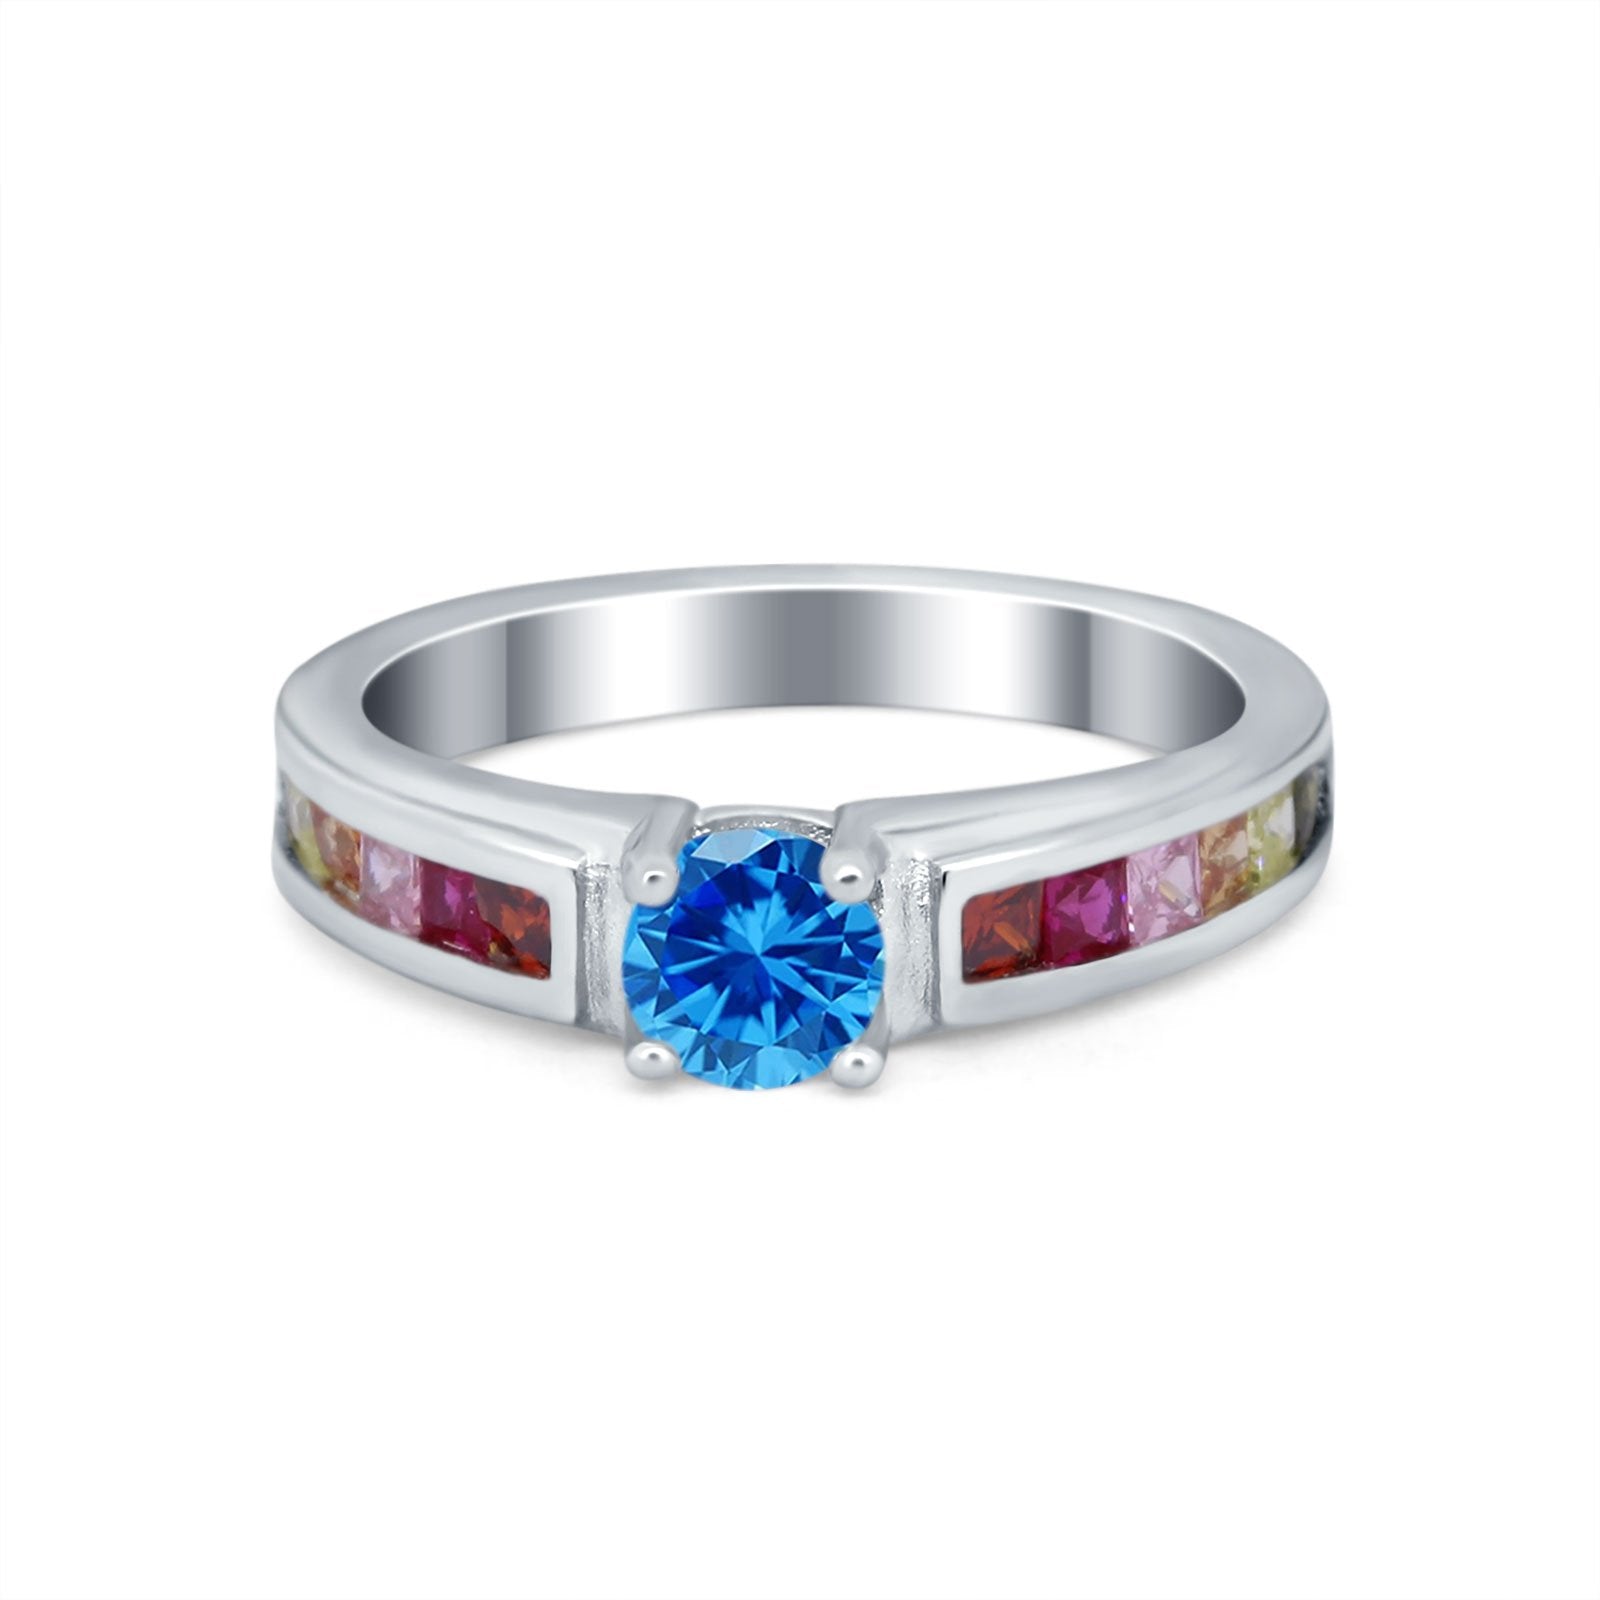 Soliaire Accent Multicolored Simulated Cubic Zirconia Ring 925 Sterling Silver